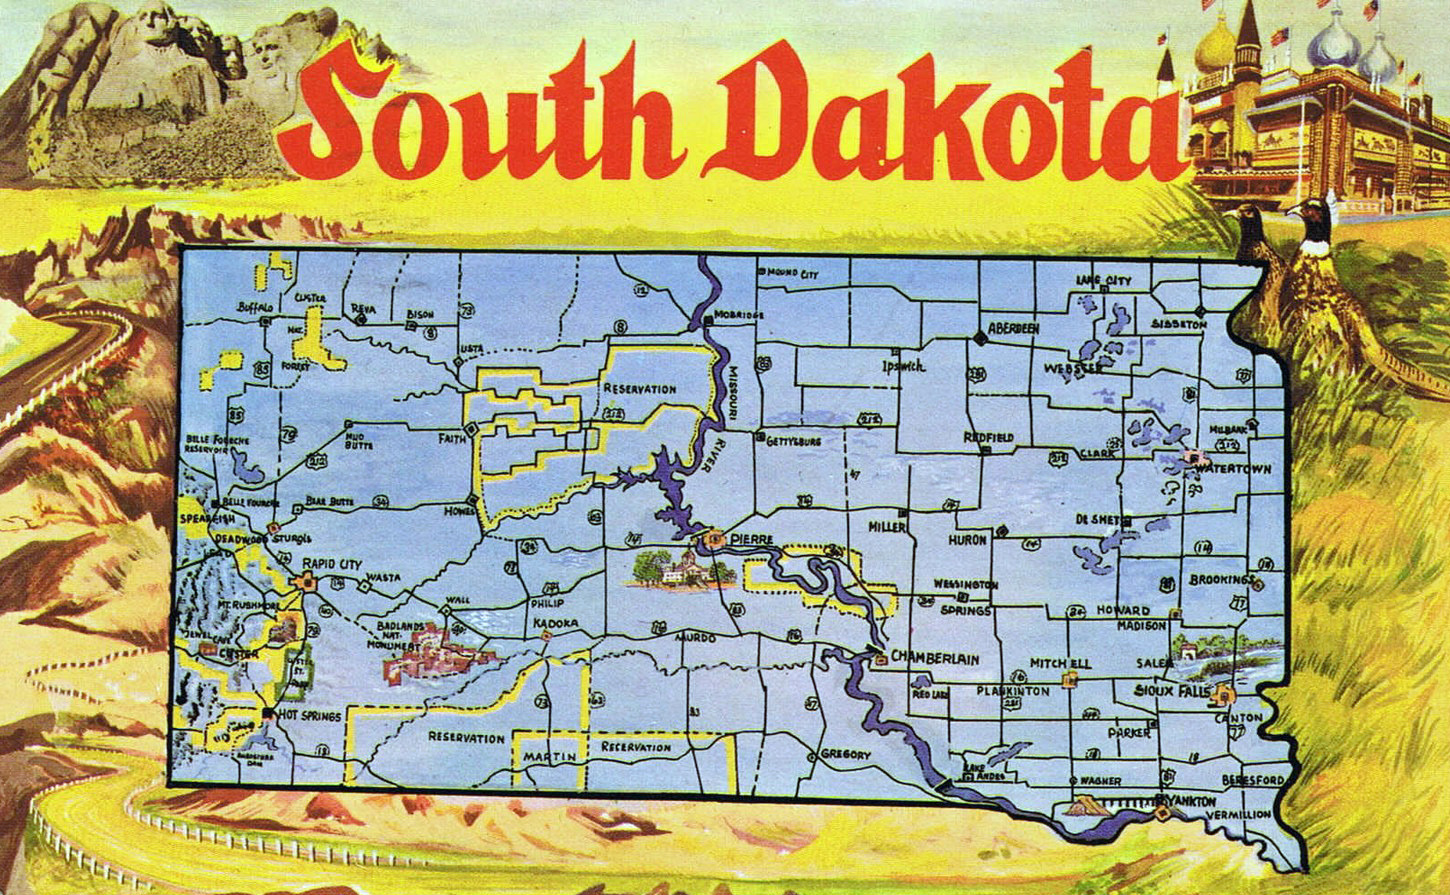 Large Detailed Tourist Map Of South Dakota With Cities And Towns | Hot ...